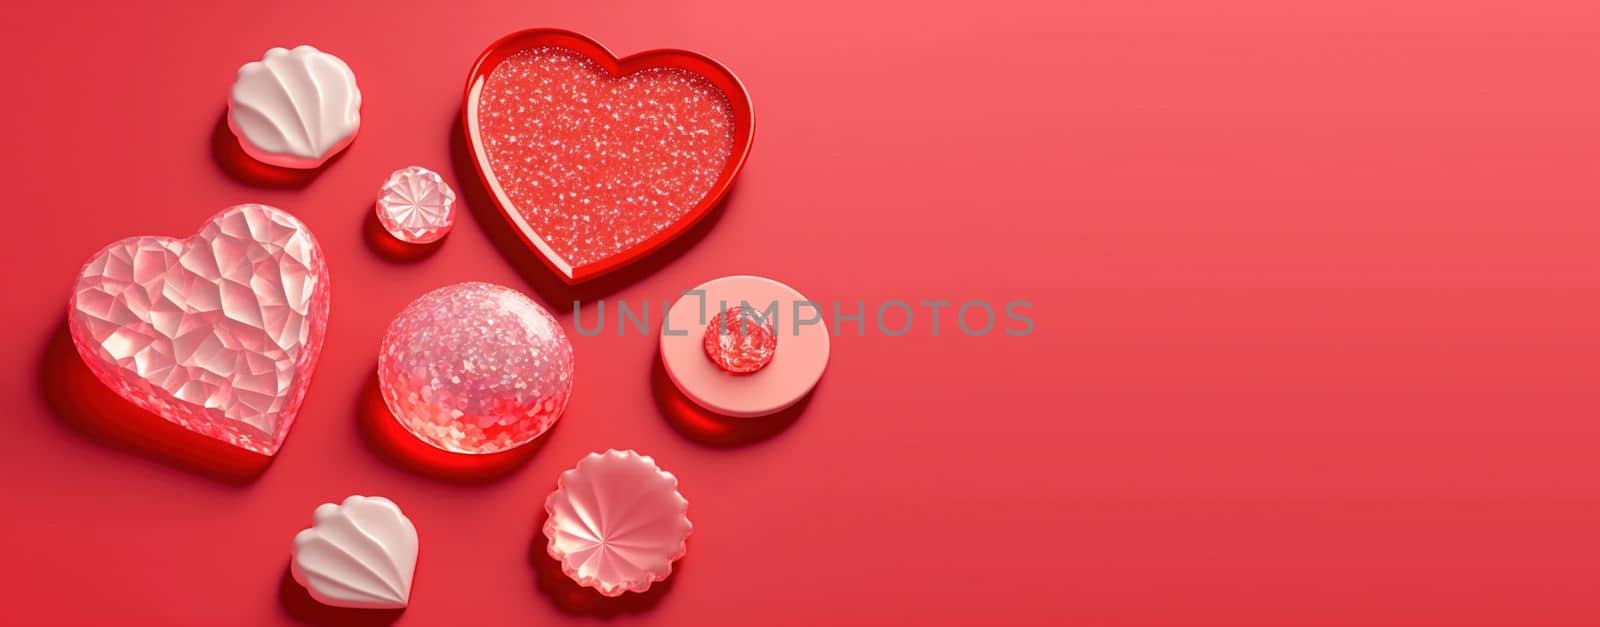 Valentine's Day 3D Illustration Design Heart Diamond and Crystal Themed Banner and Background by templator